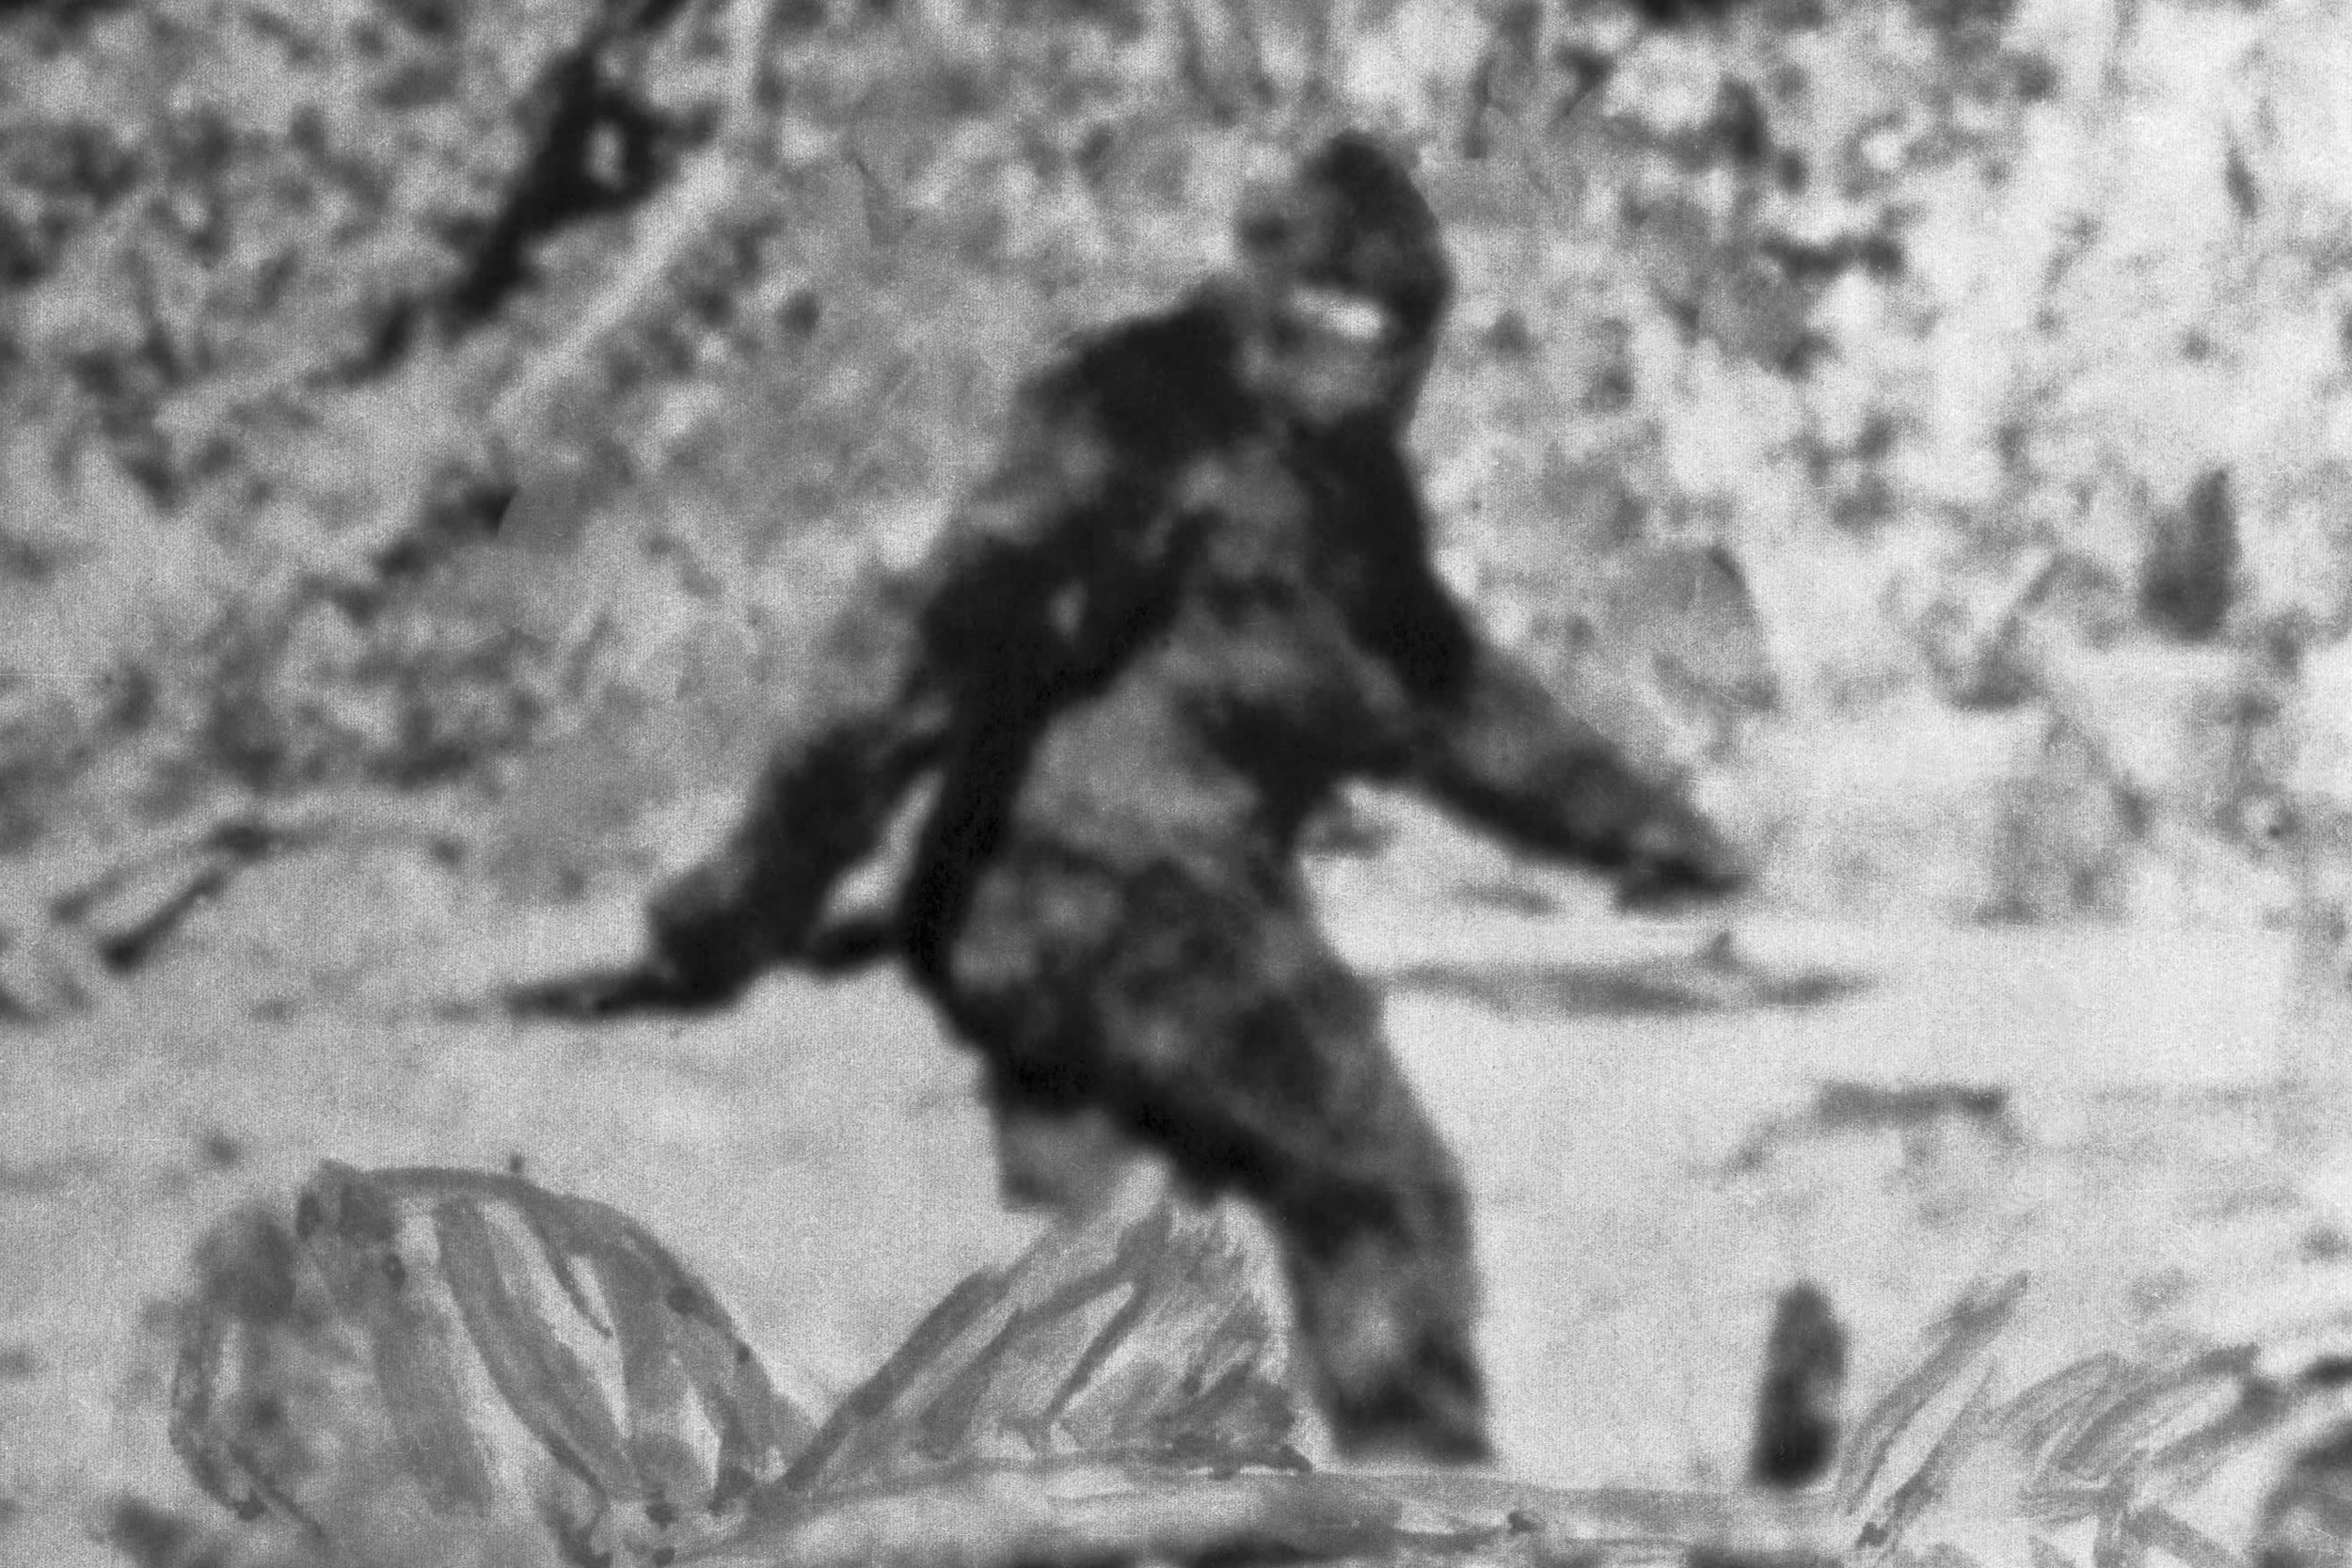 Bigfoot image from the Patterson-Gimlin film